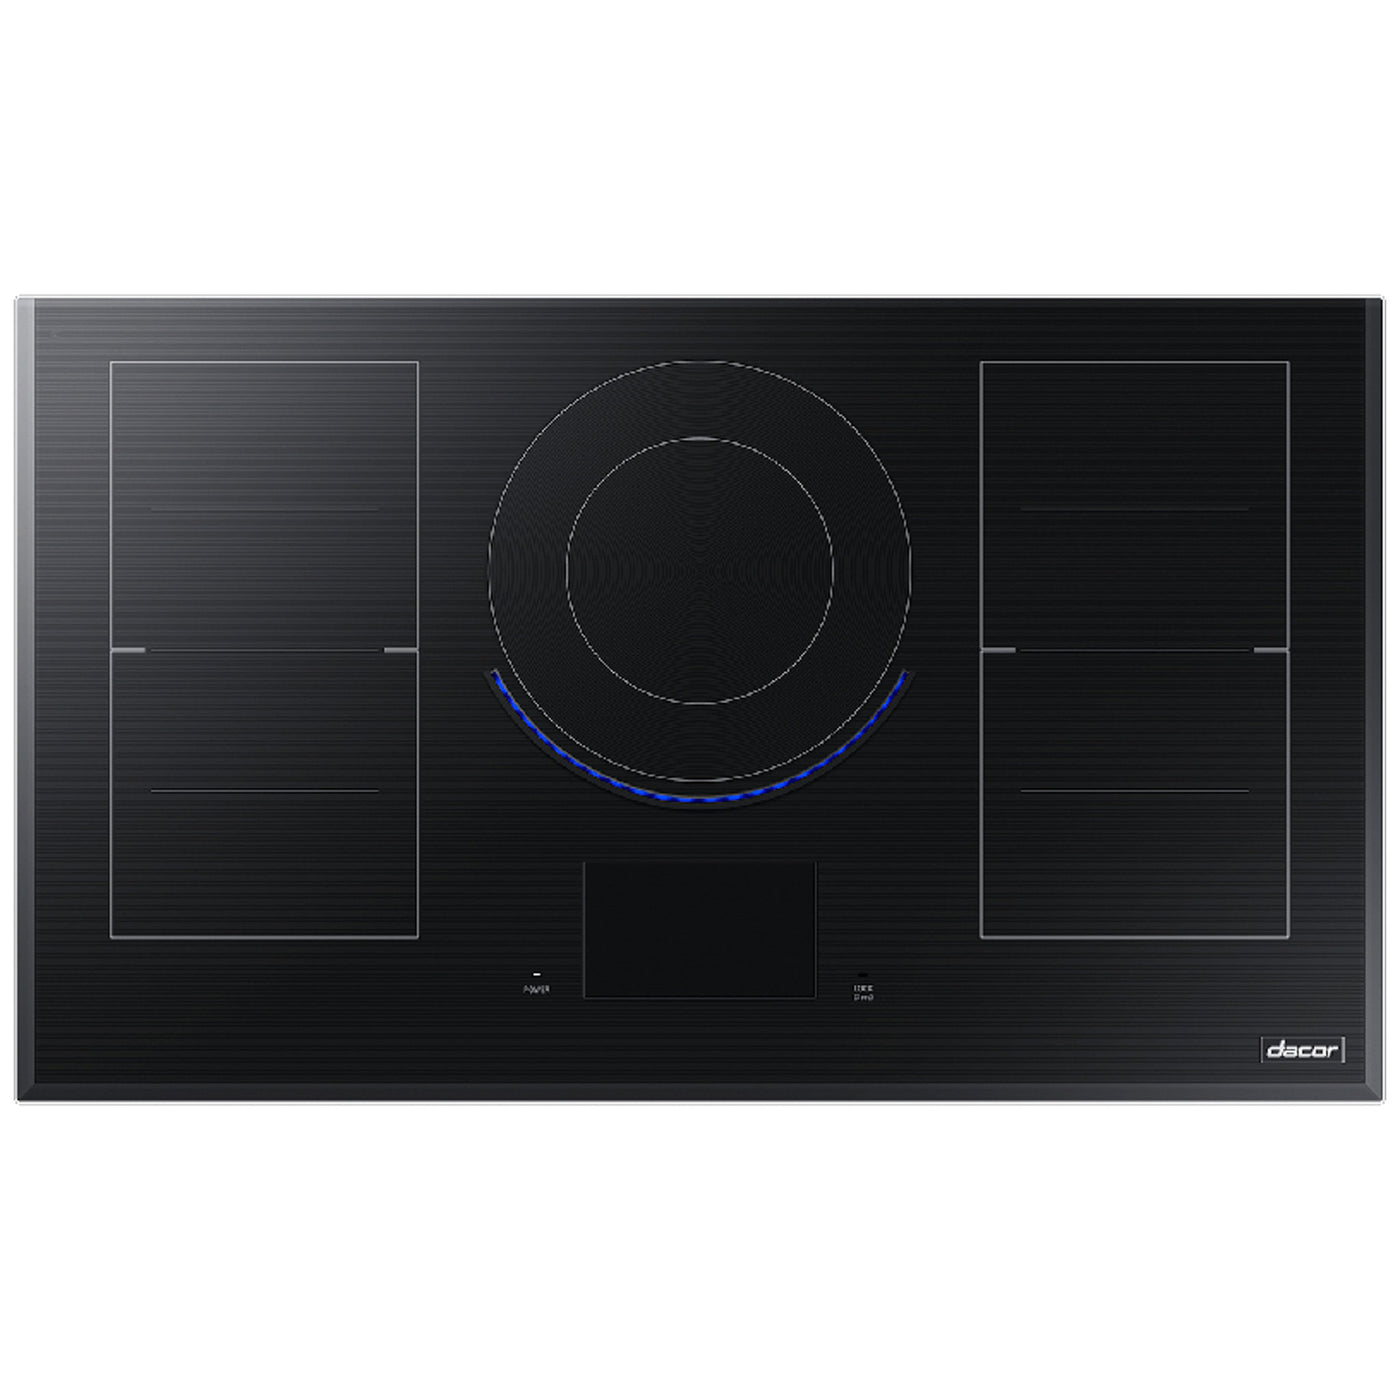 Dacor-DTI36M977BB induction cooktop